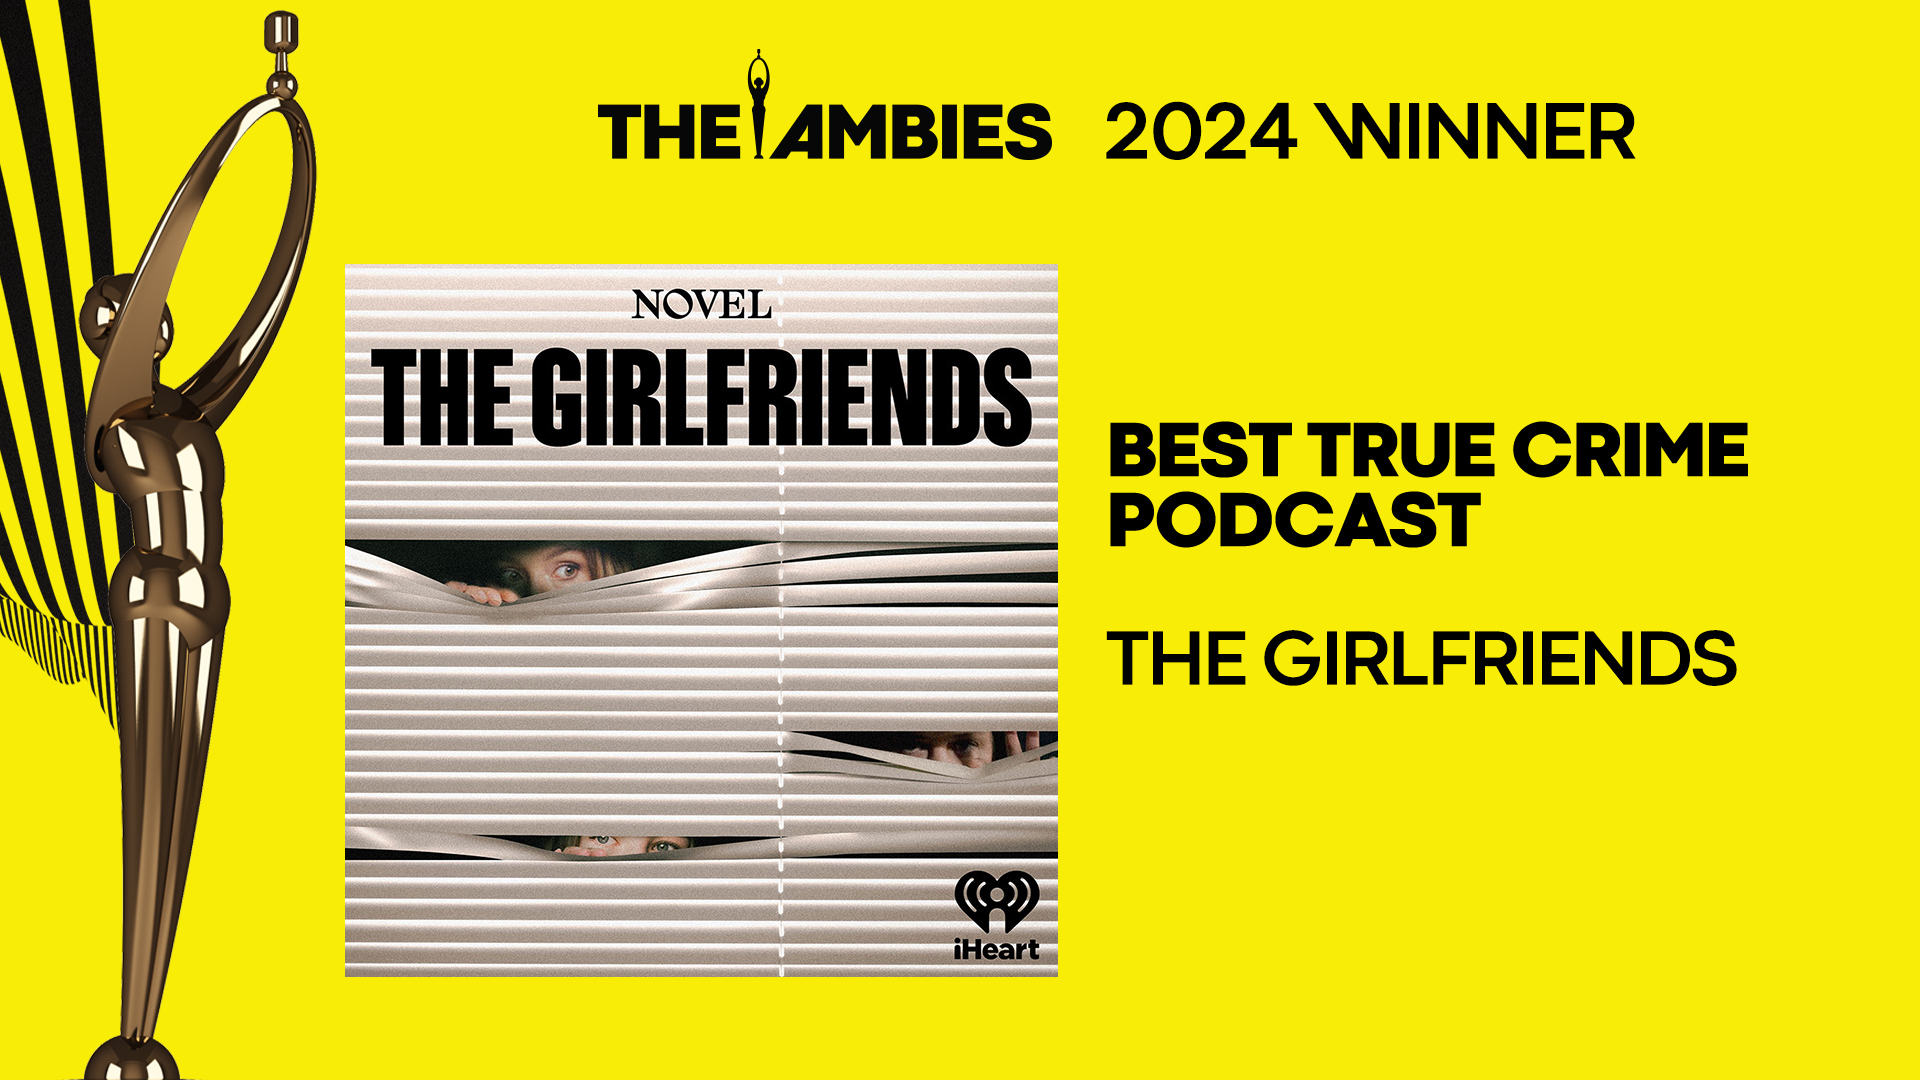 Congratulations to RPJ Client Novel Audio on Winning an Ambie True Crime Podcast Award for “The Girlfriends”!